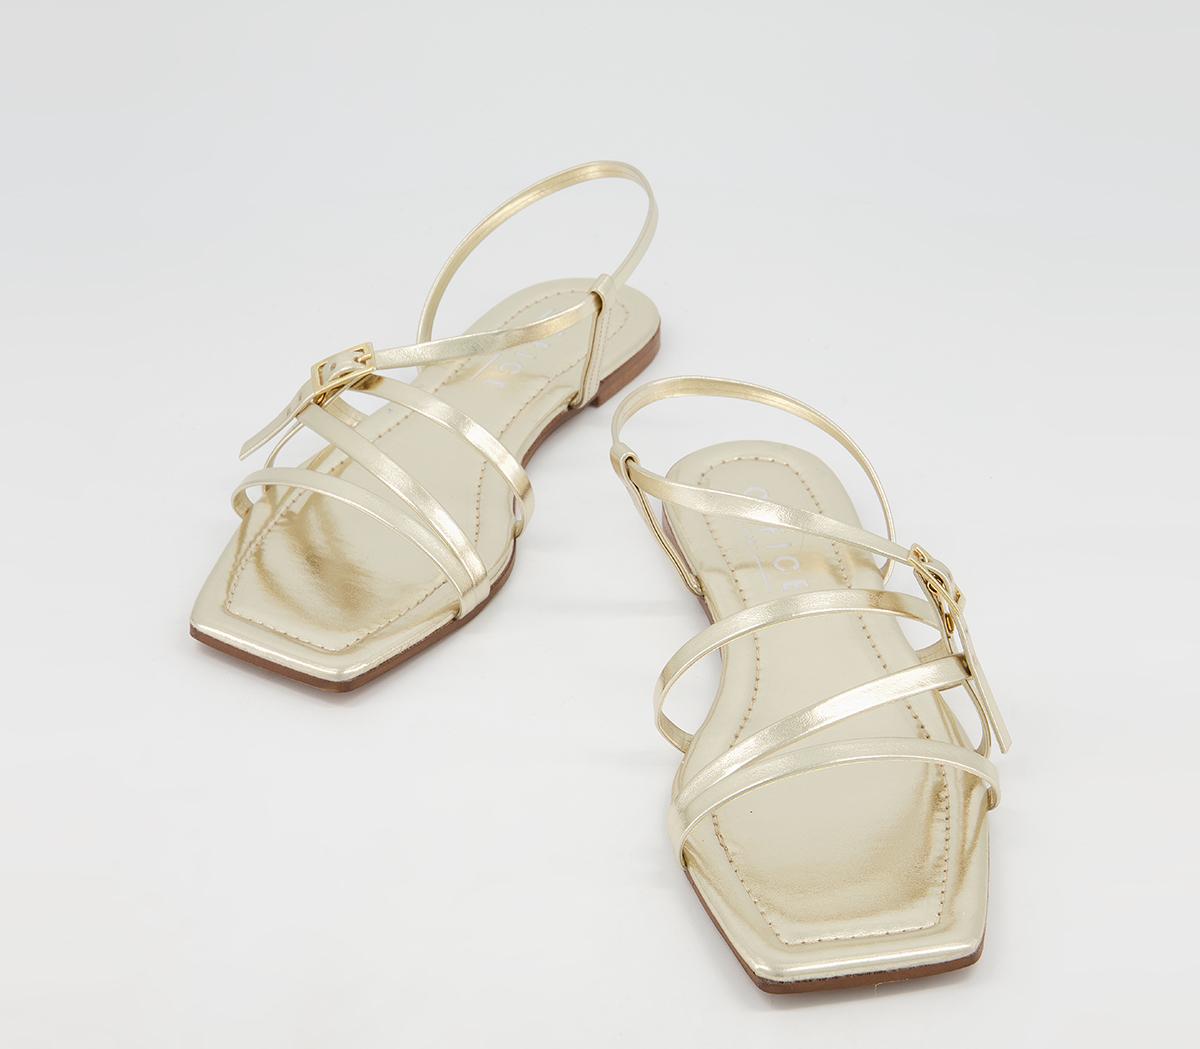 OFFICE Setting Square Toe Strappy Sandals Gold - Women’s Sandals